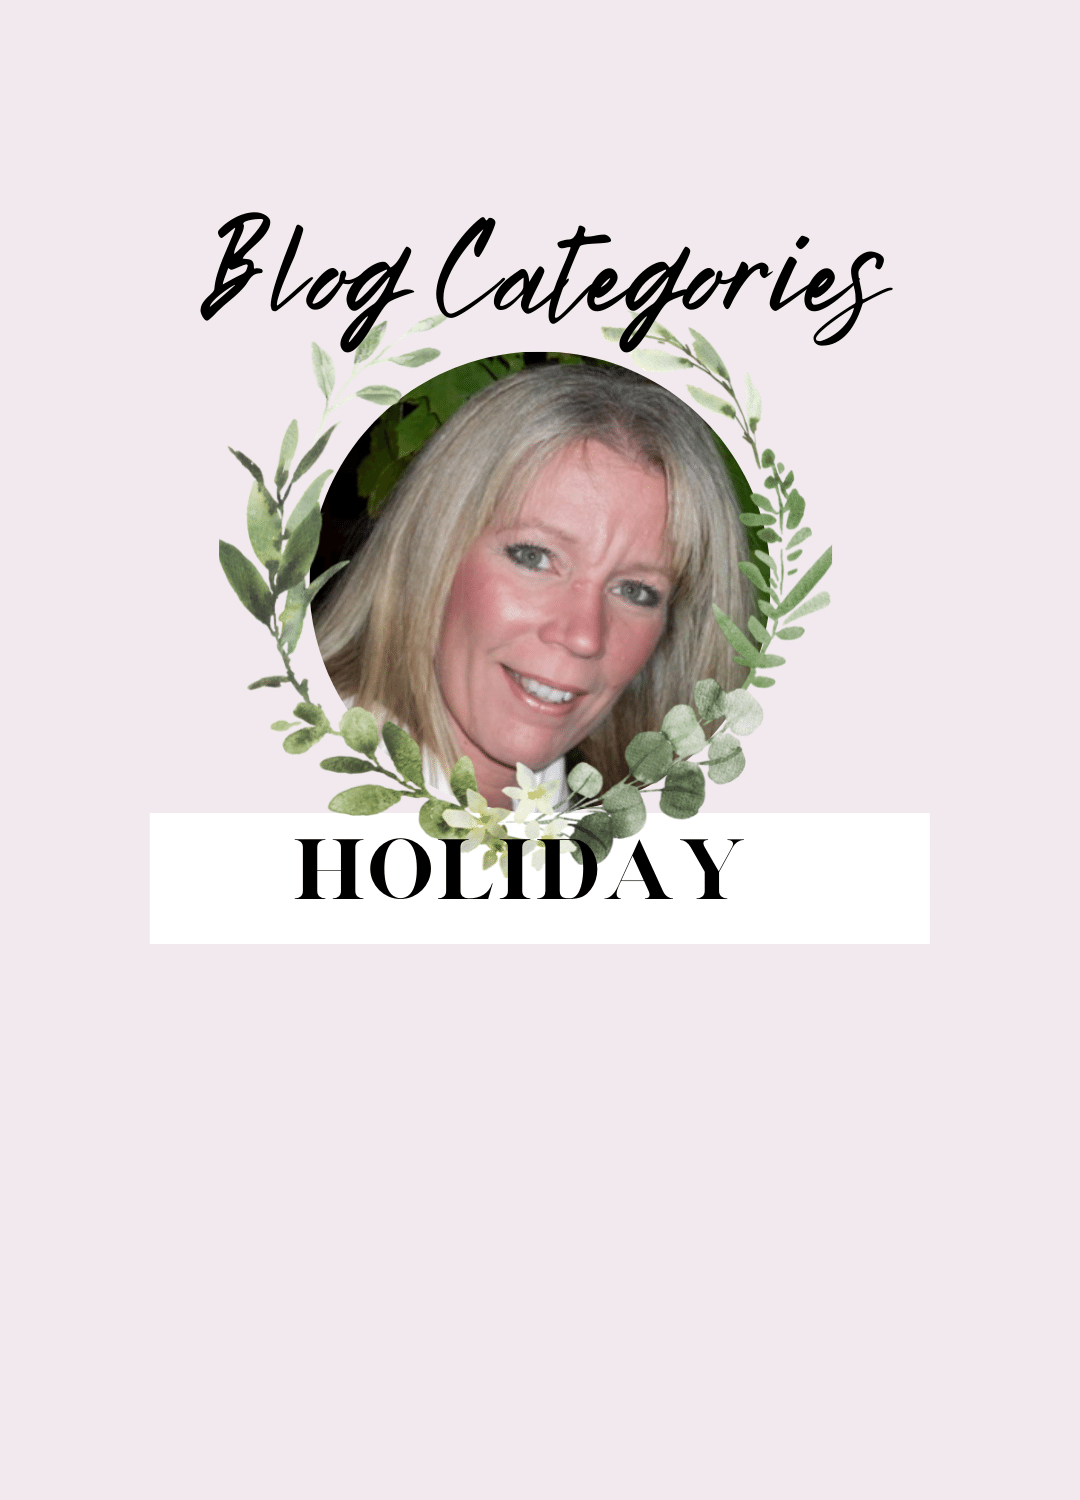 Category Holiday Blog Posts 